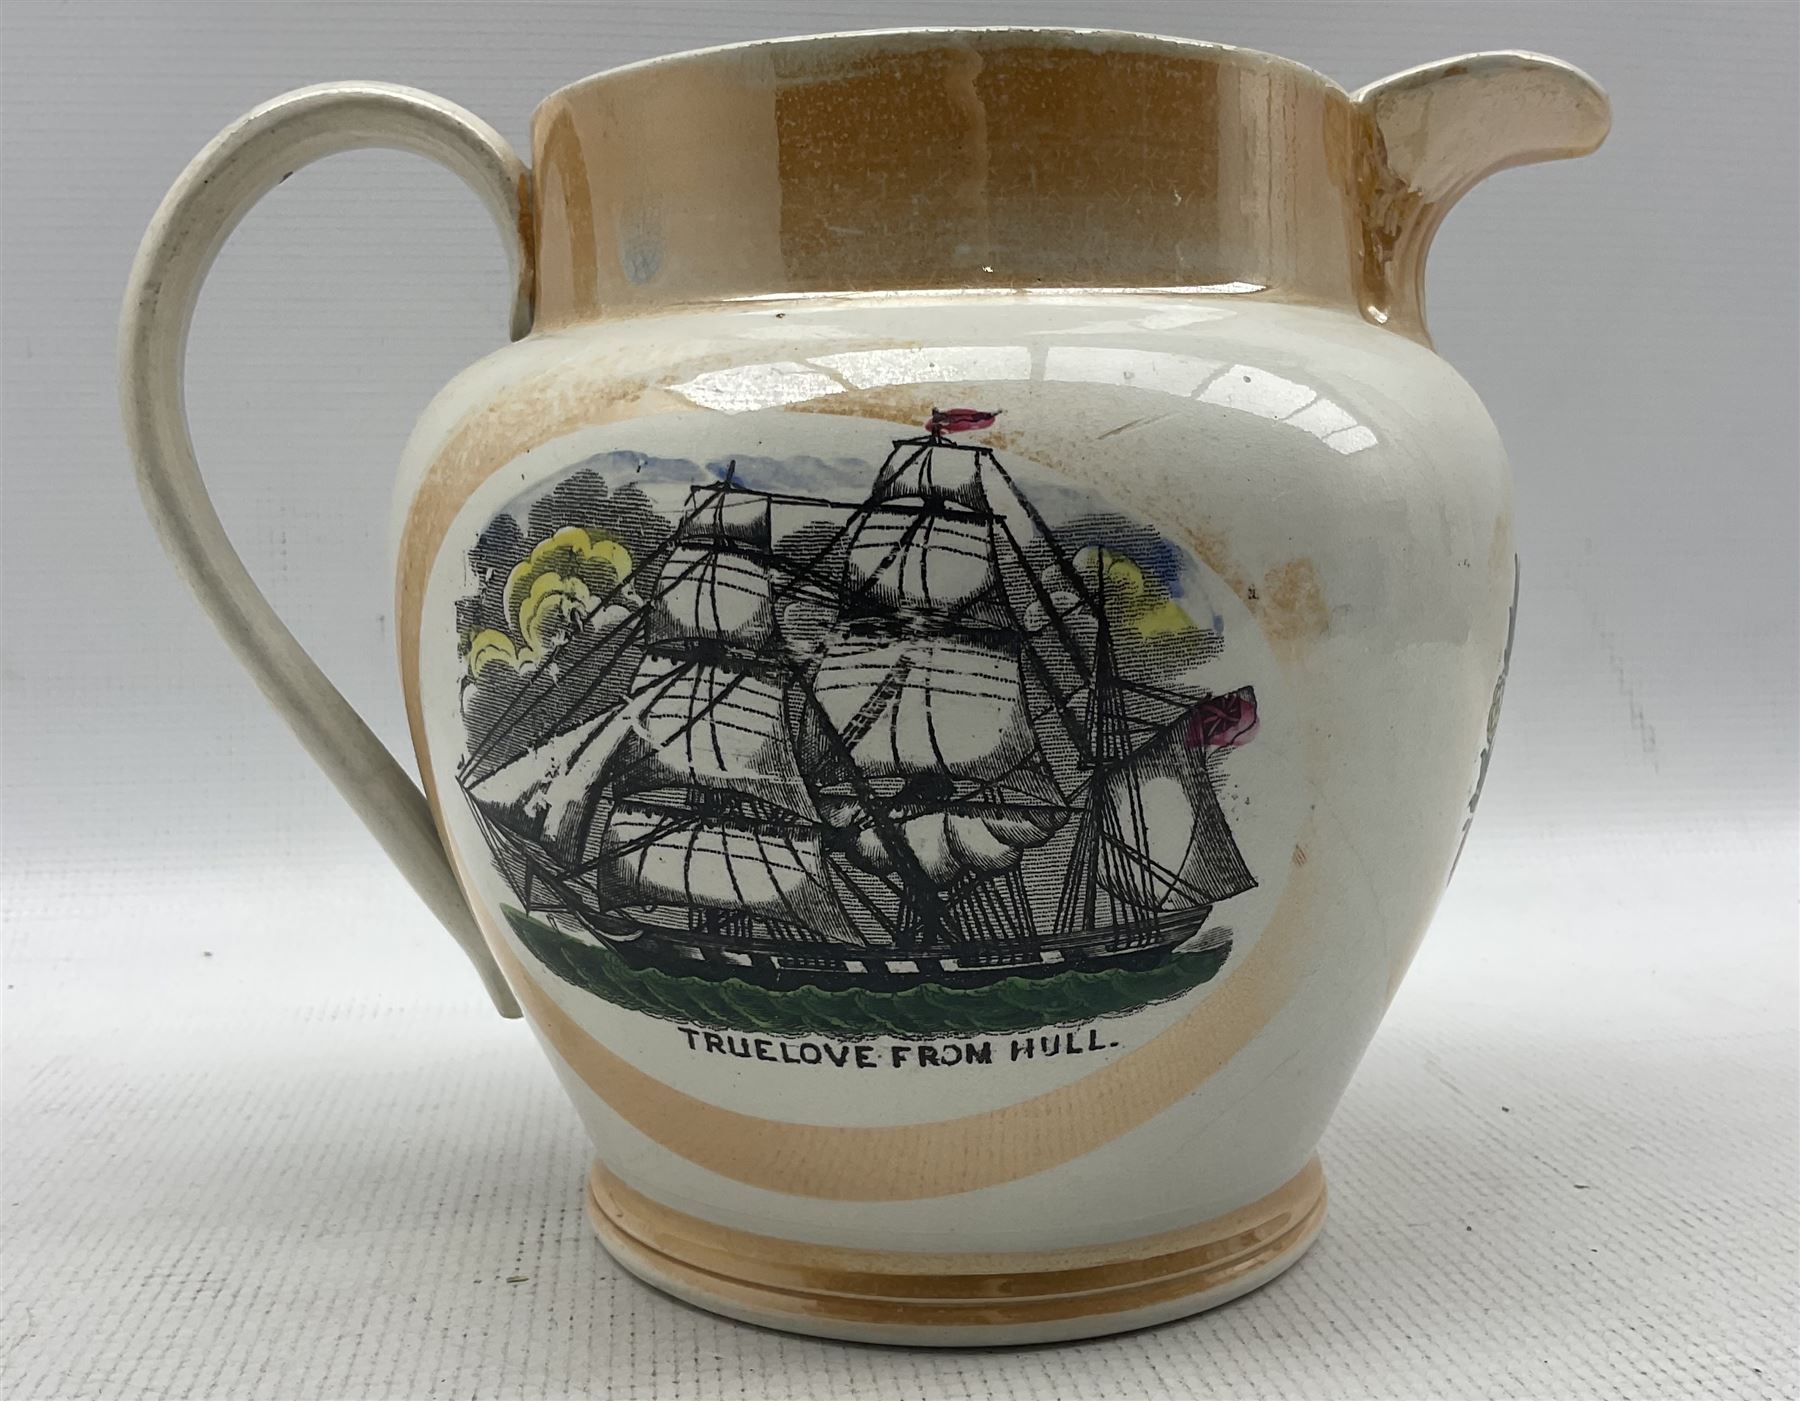 19th century Sunderland orange lustre jug with a study of a sailing ship 'True Love from Hull' - Image 2 of 3